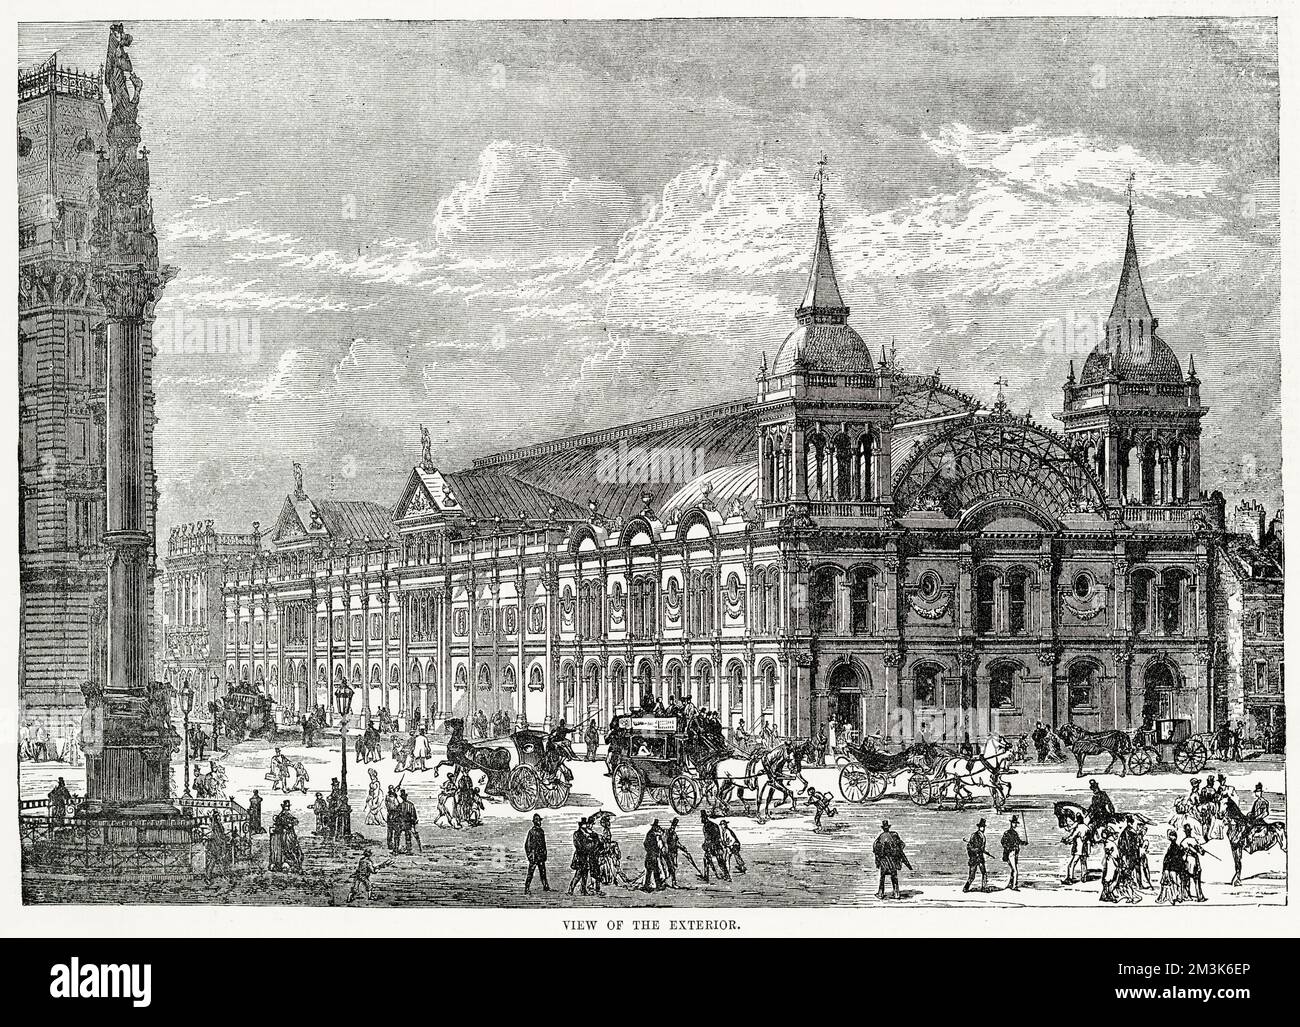 Exterior of the Royal Aquarium and Winter Garden in Westminster, London, a place for entertainment, performance and sport, opening on the 22nd January 1876. Stock Photo